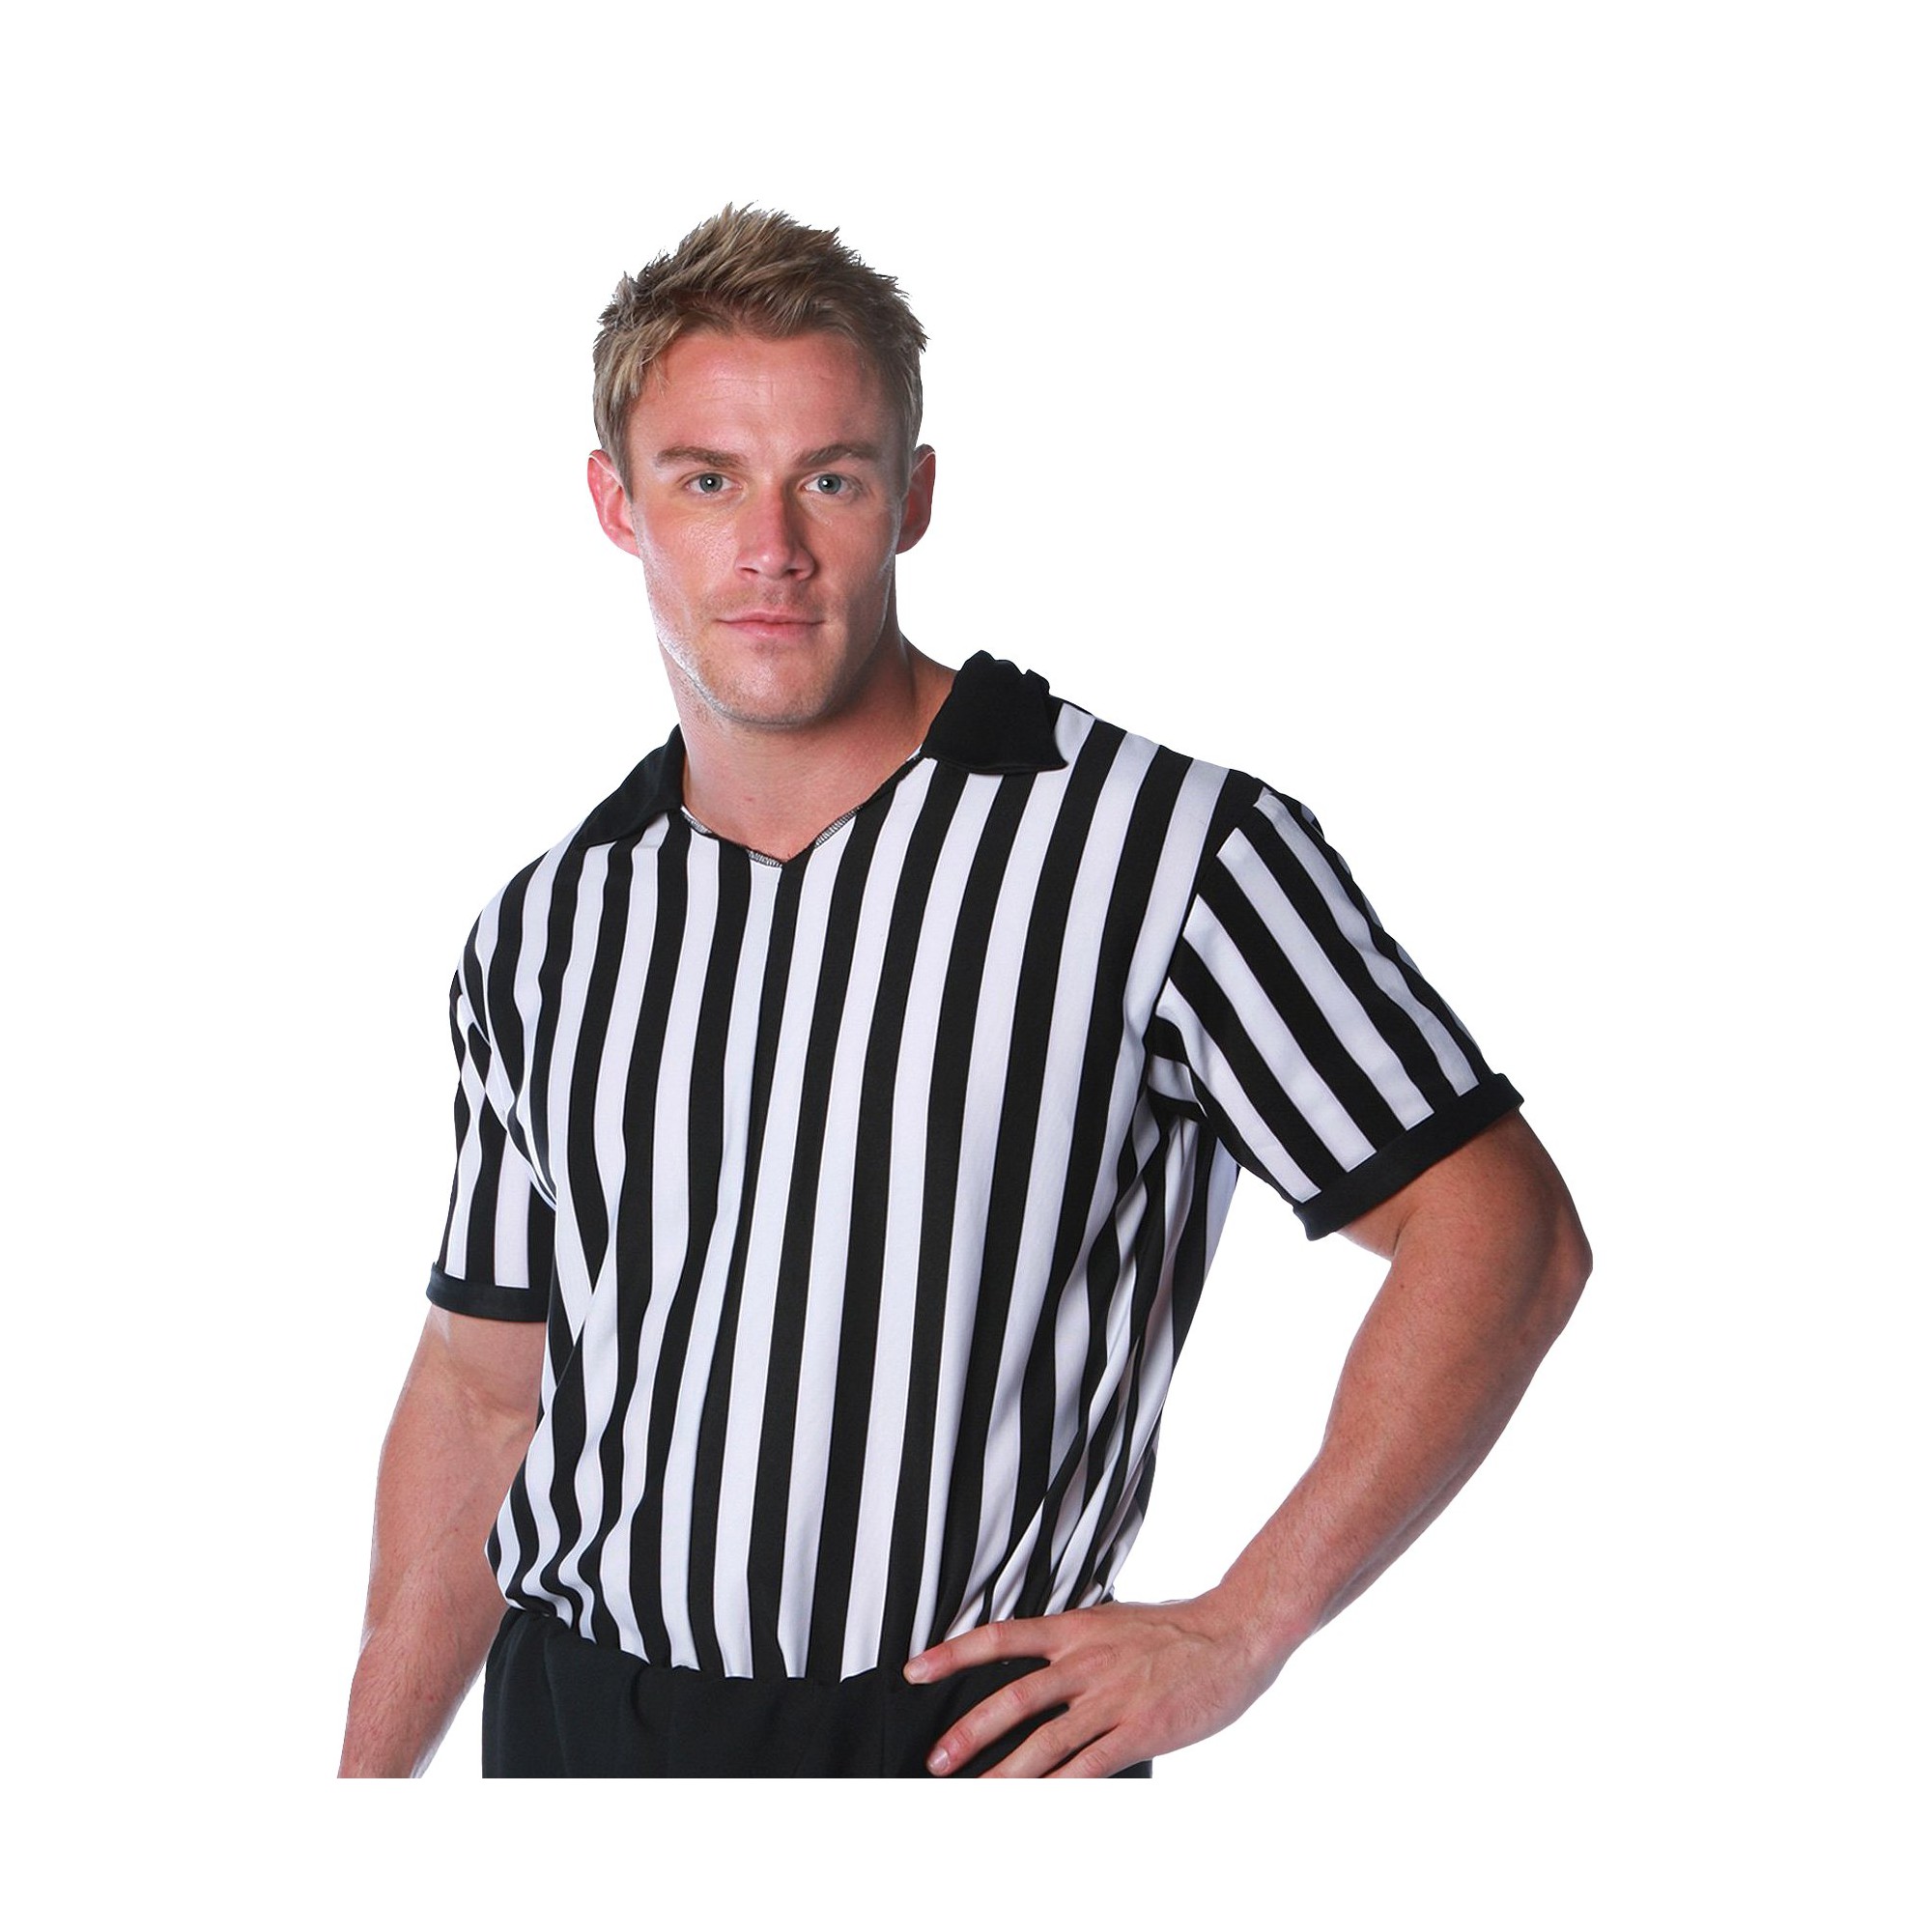 Halloween Adult Referee Shirt Costume, Men's, Size: One Size, MultiColored